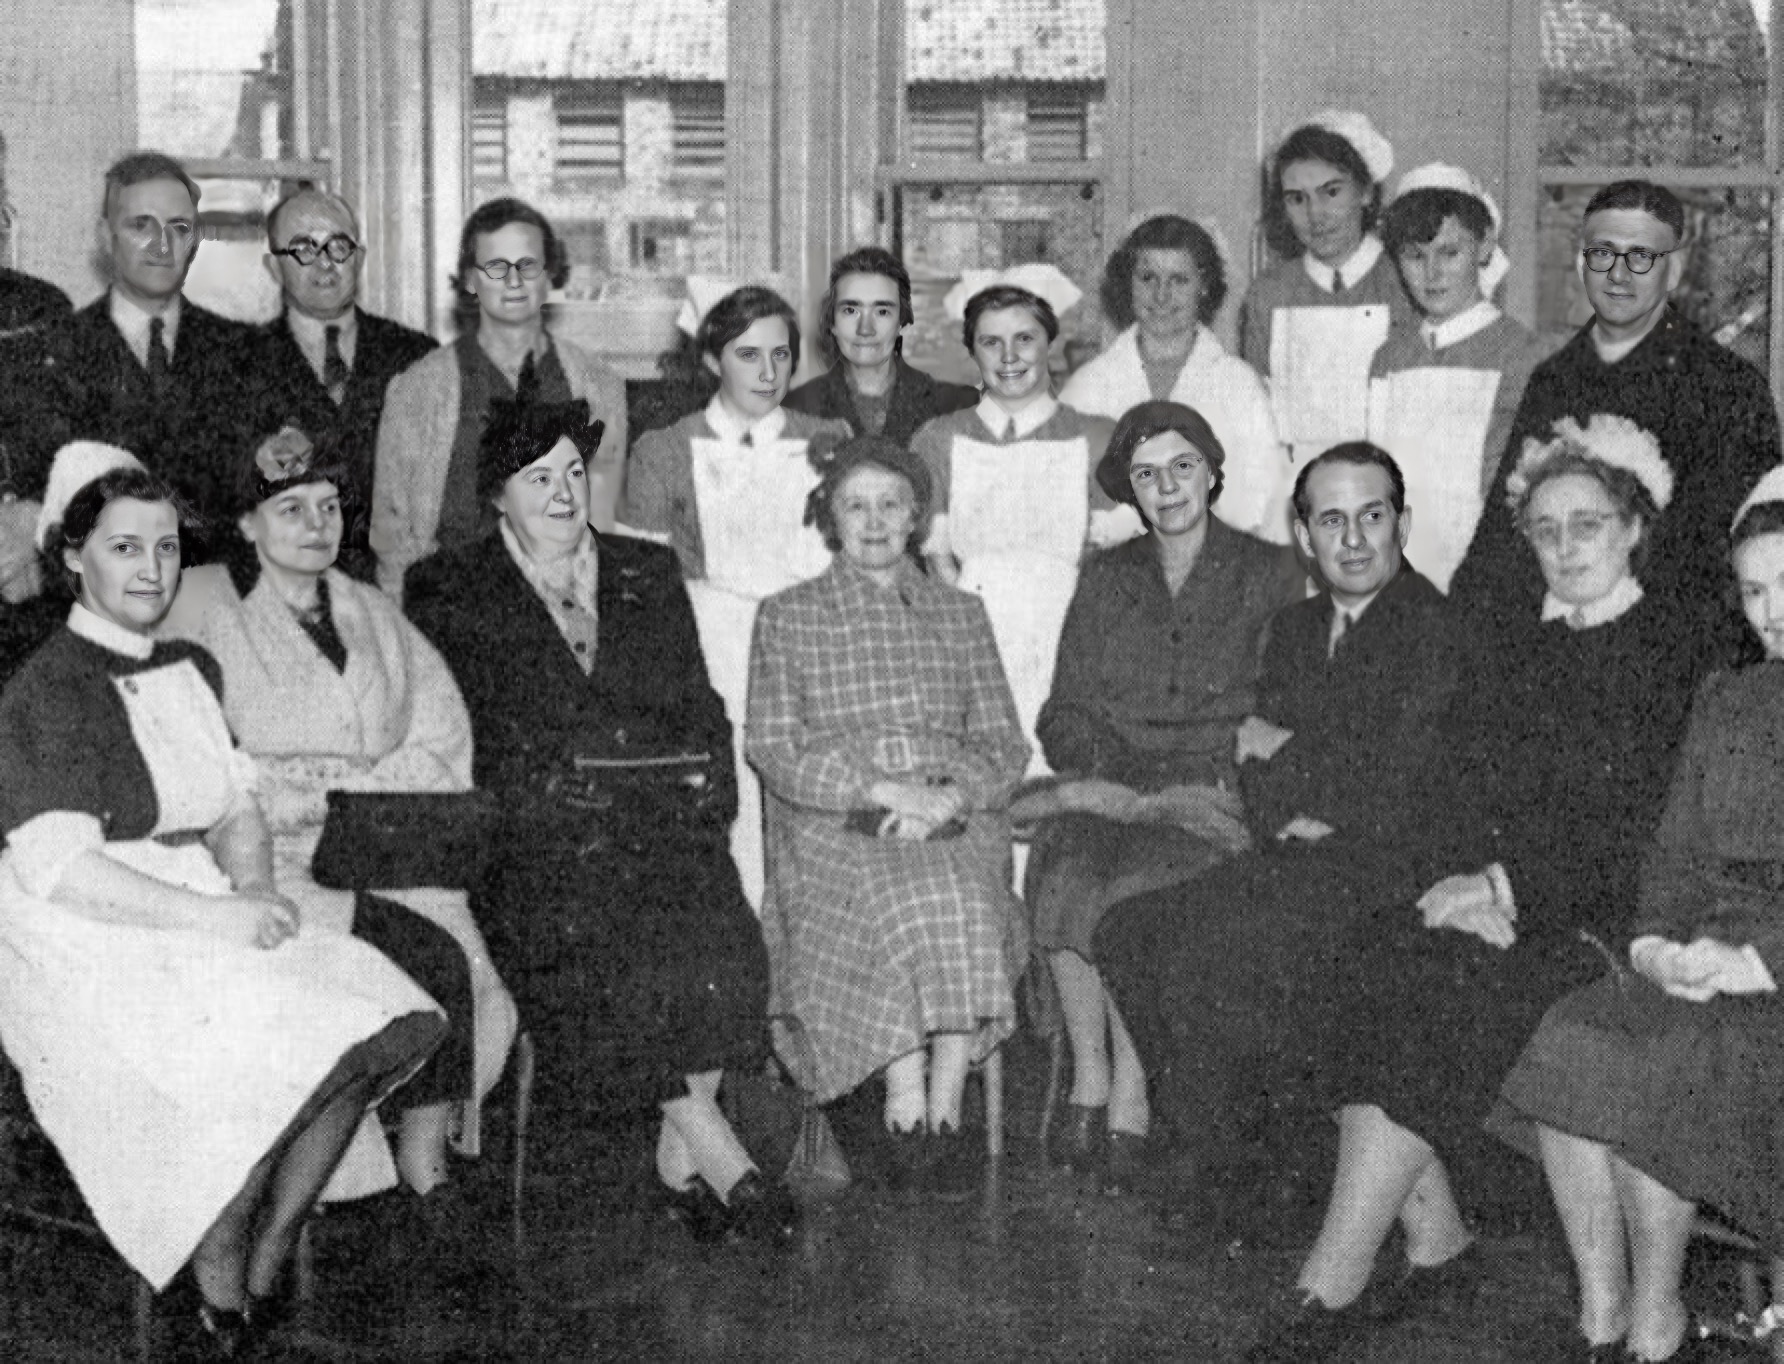 These were staff at the Friarage hospital circa 1950.